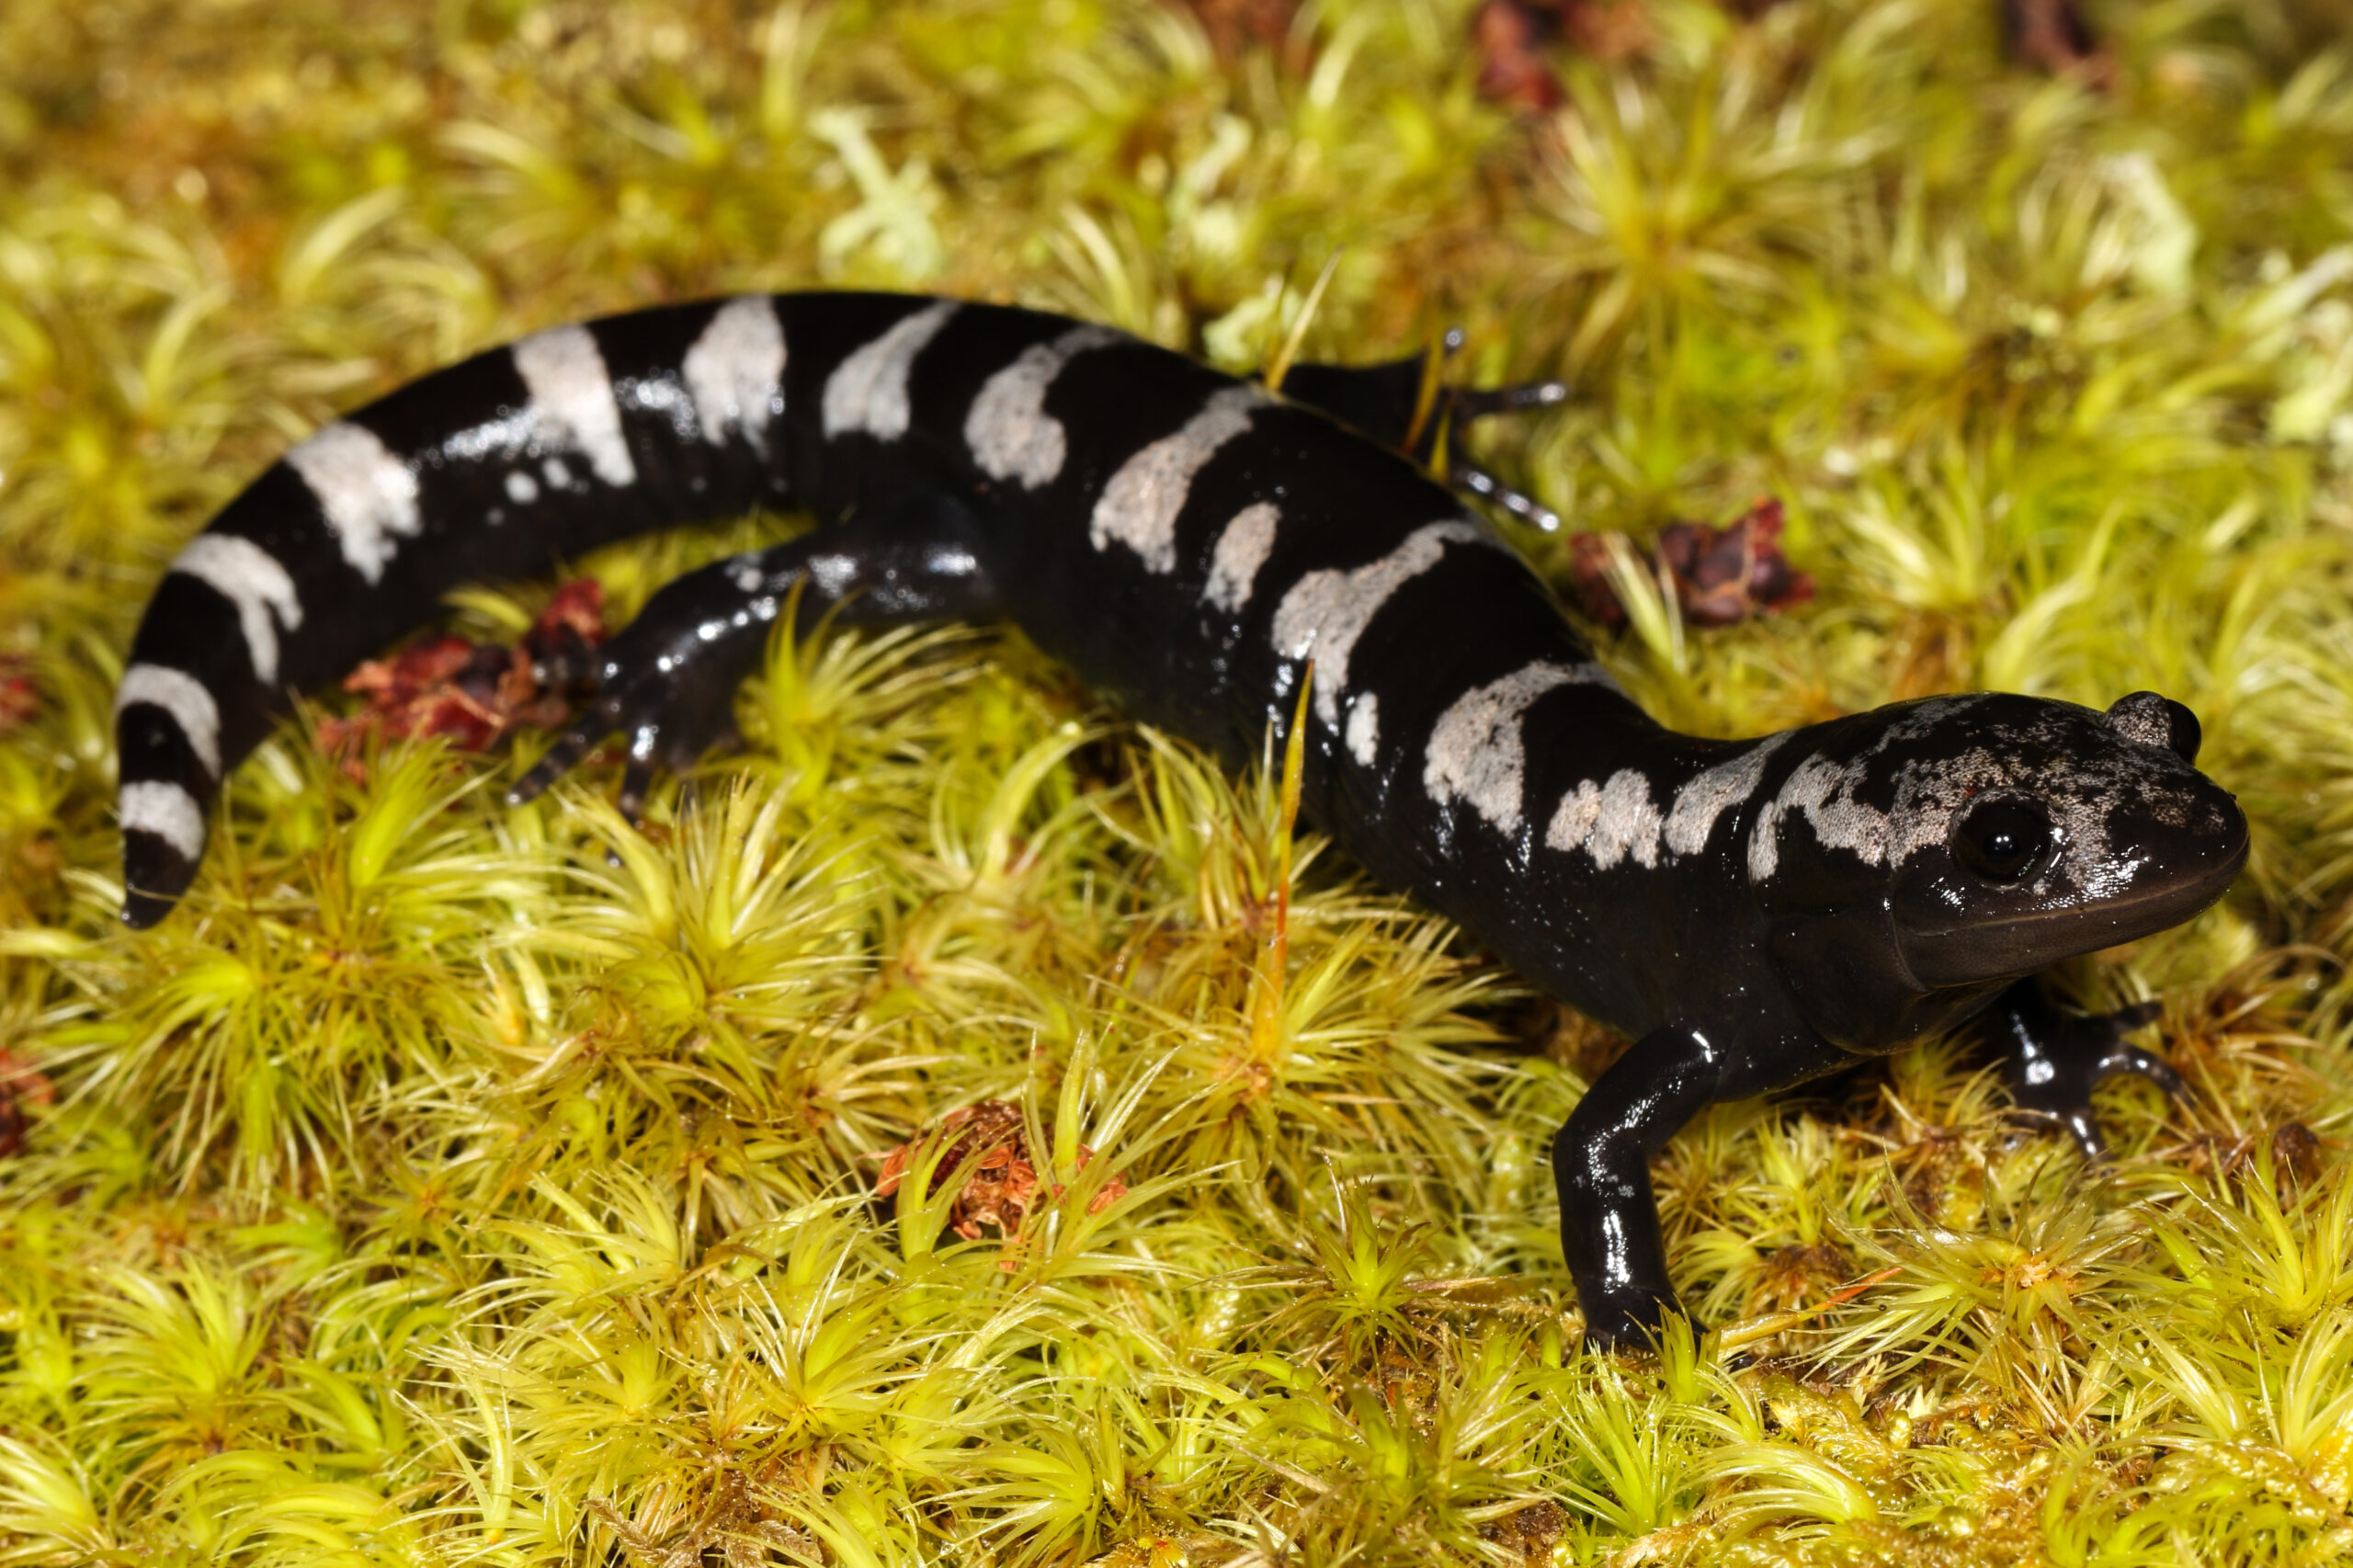 The marbled salamander is a species of mole salamander found in the eastern United States.